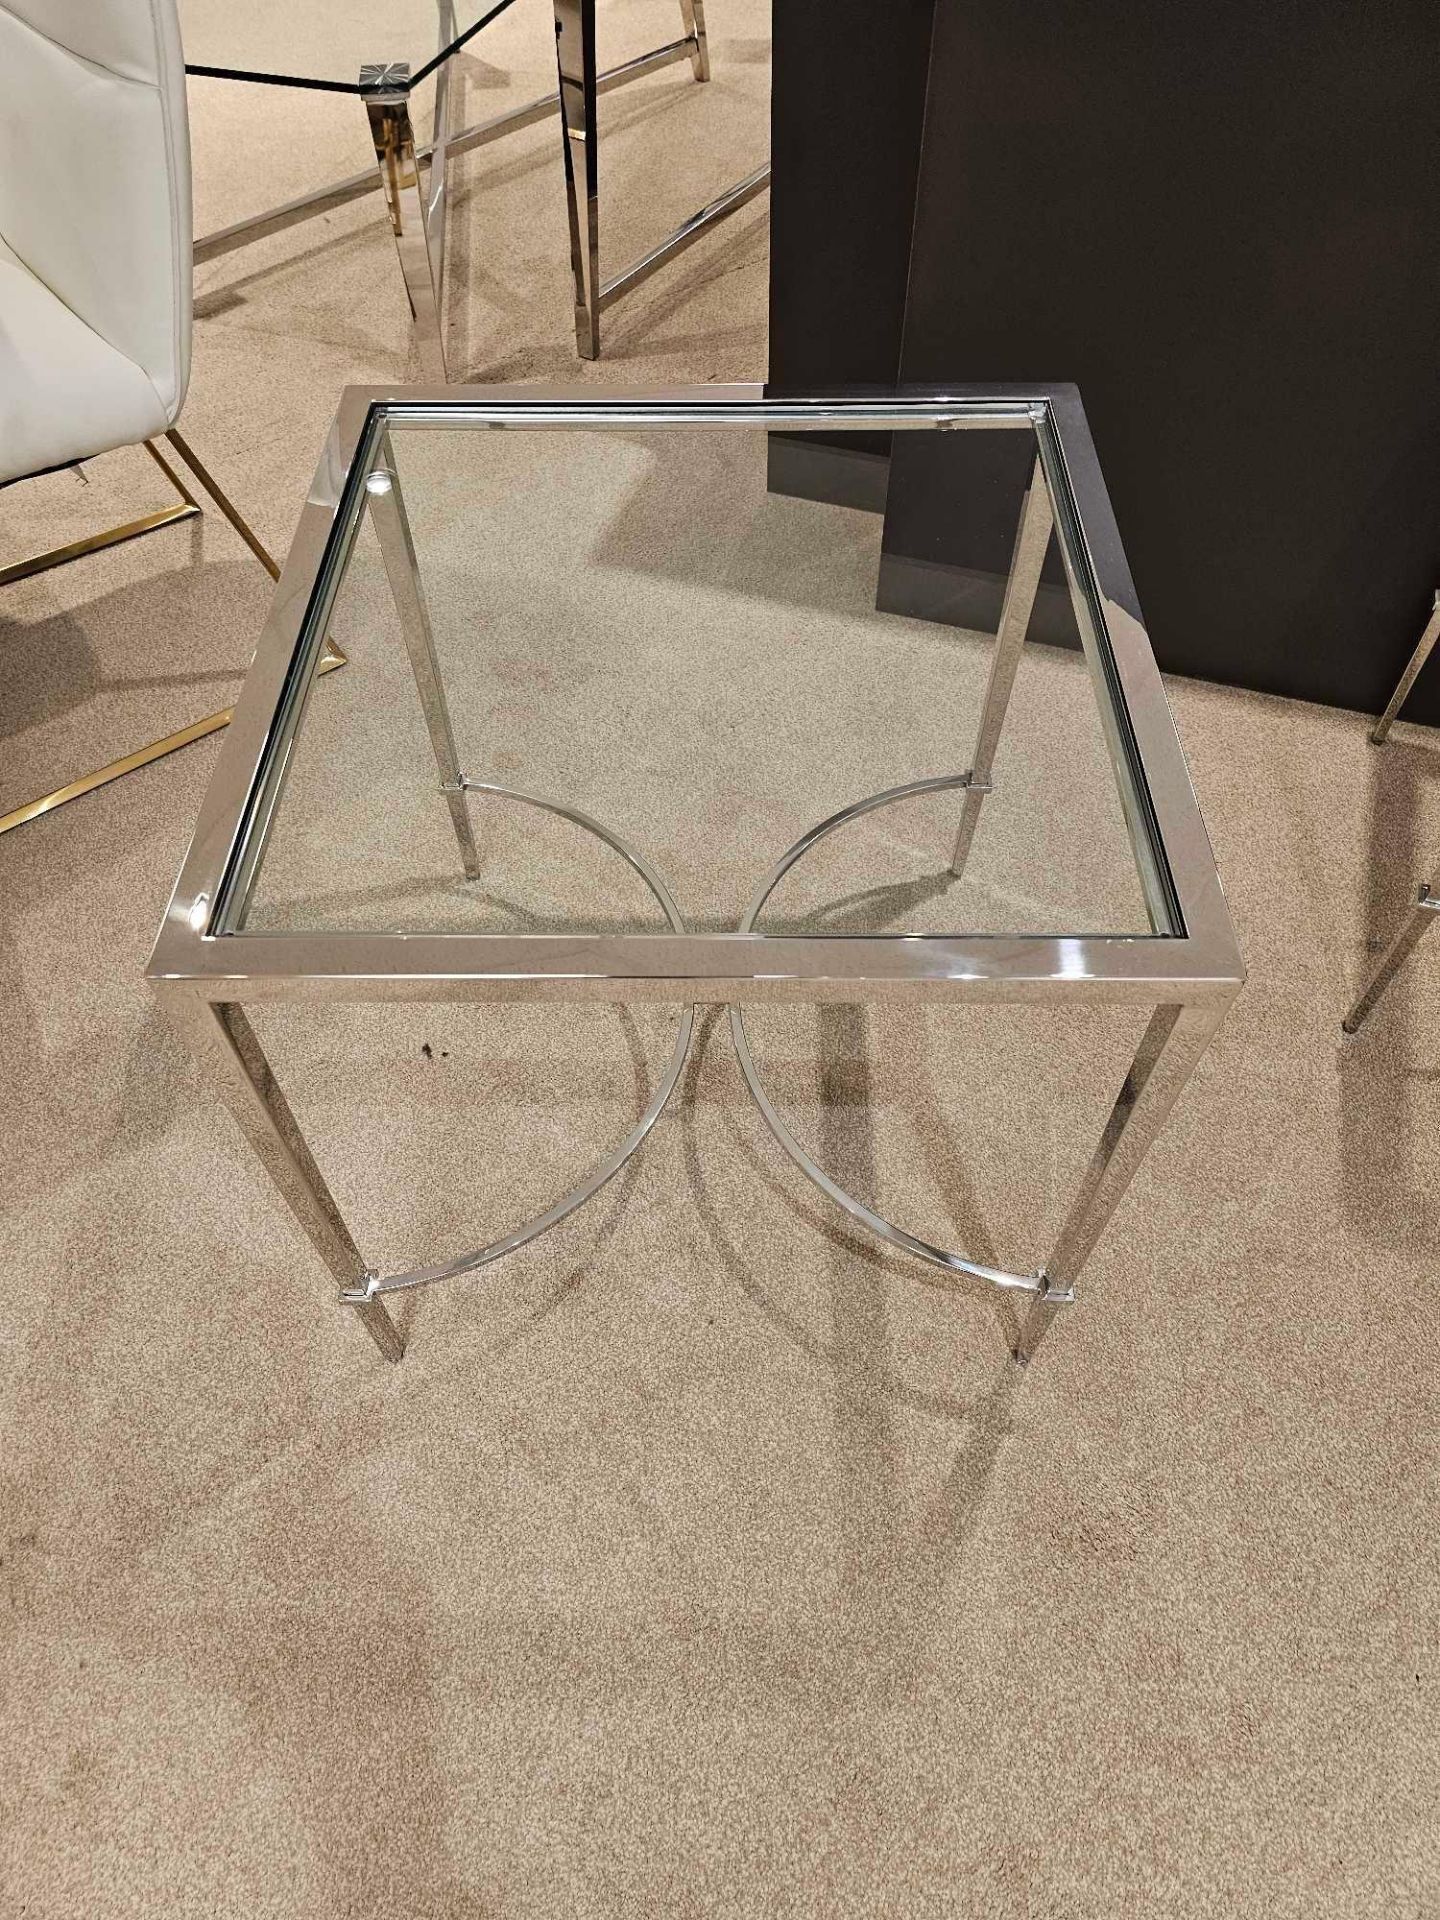 Tokyo Lamp Table by Kesterport The Tokyo lamp table with its clear glass top and a refined tapered - Image 3 of 6